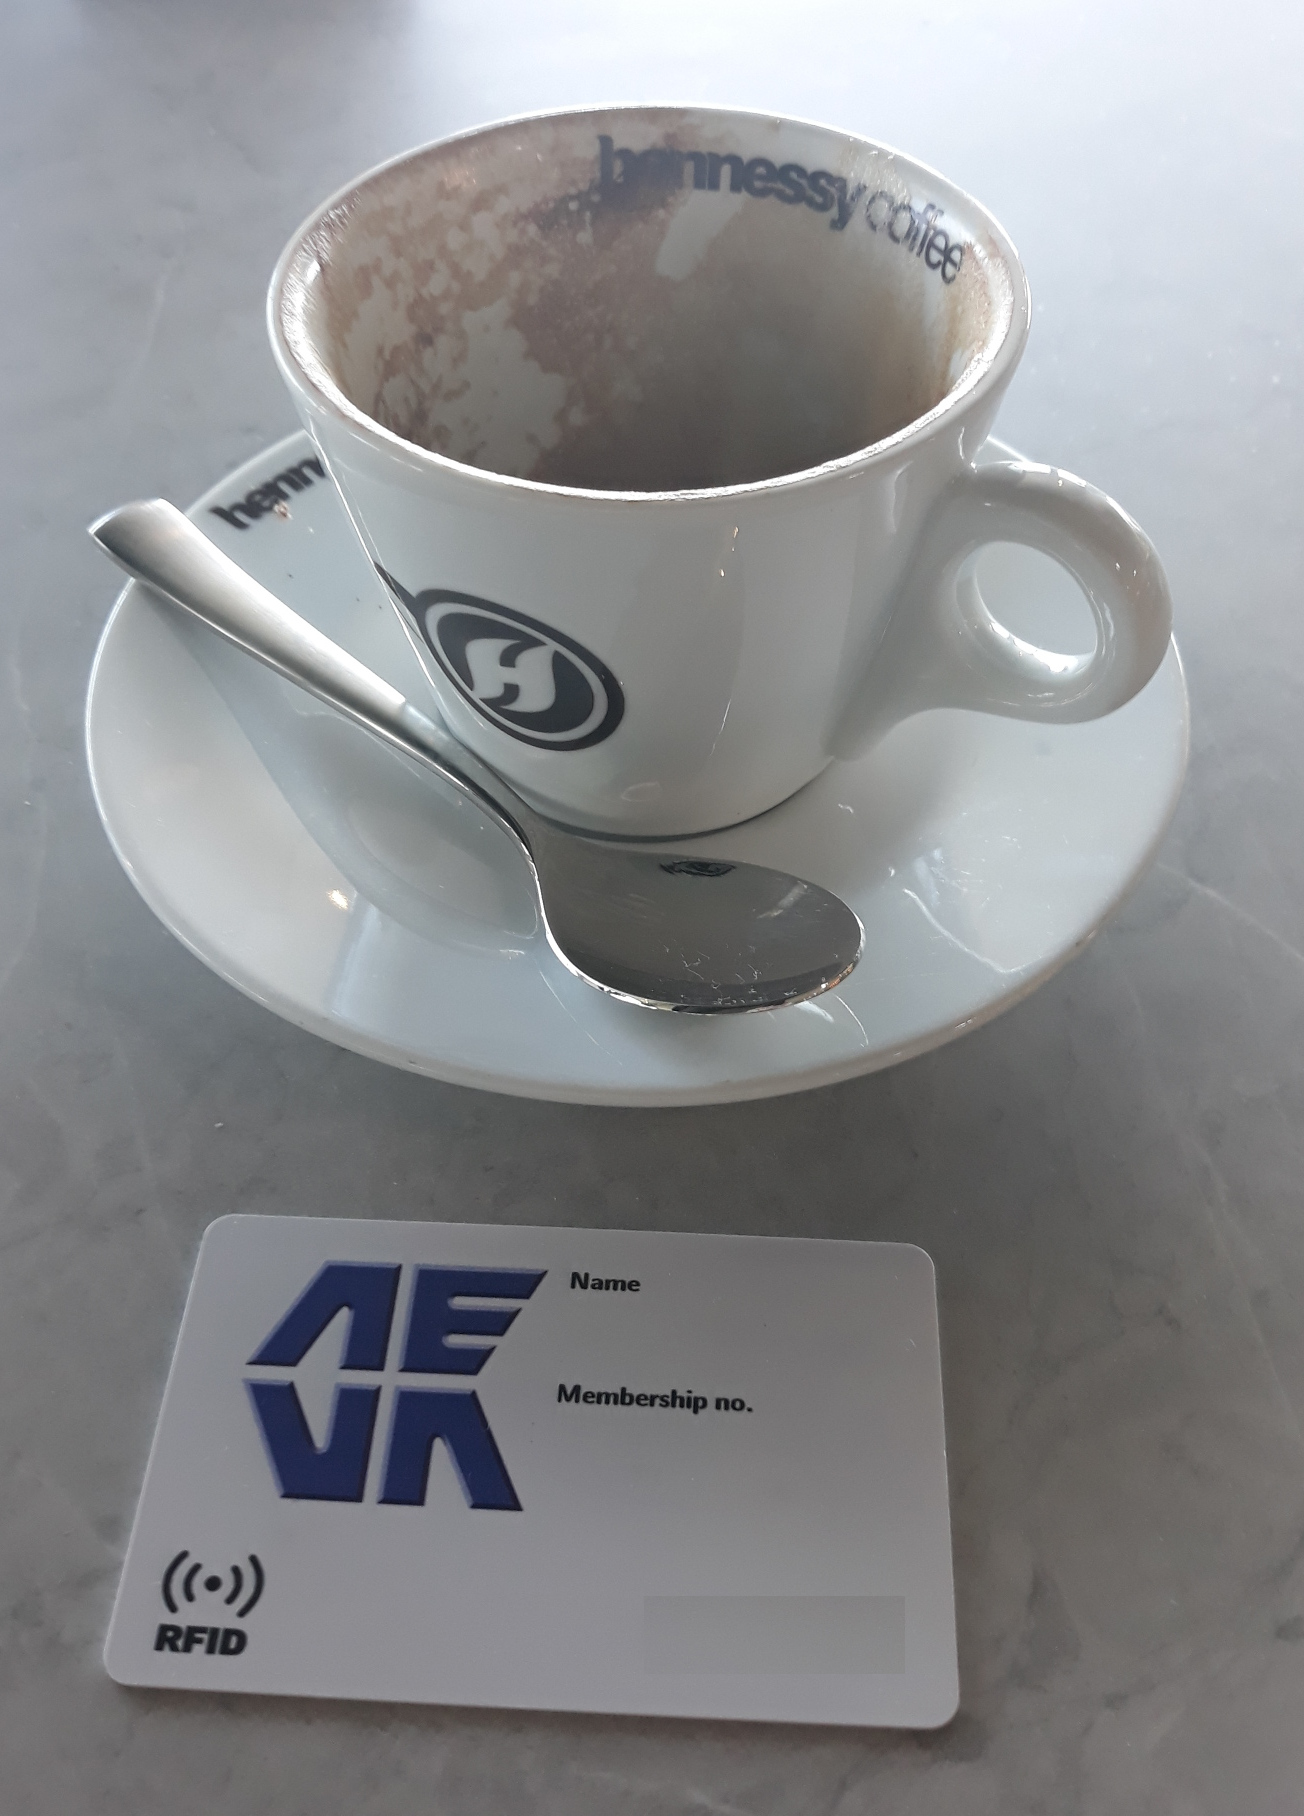 RFID card and a cup of coffee